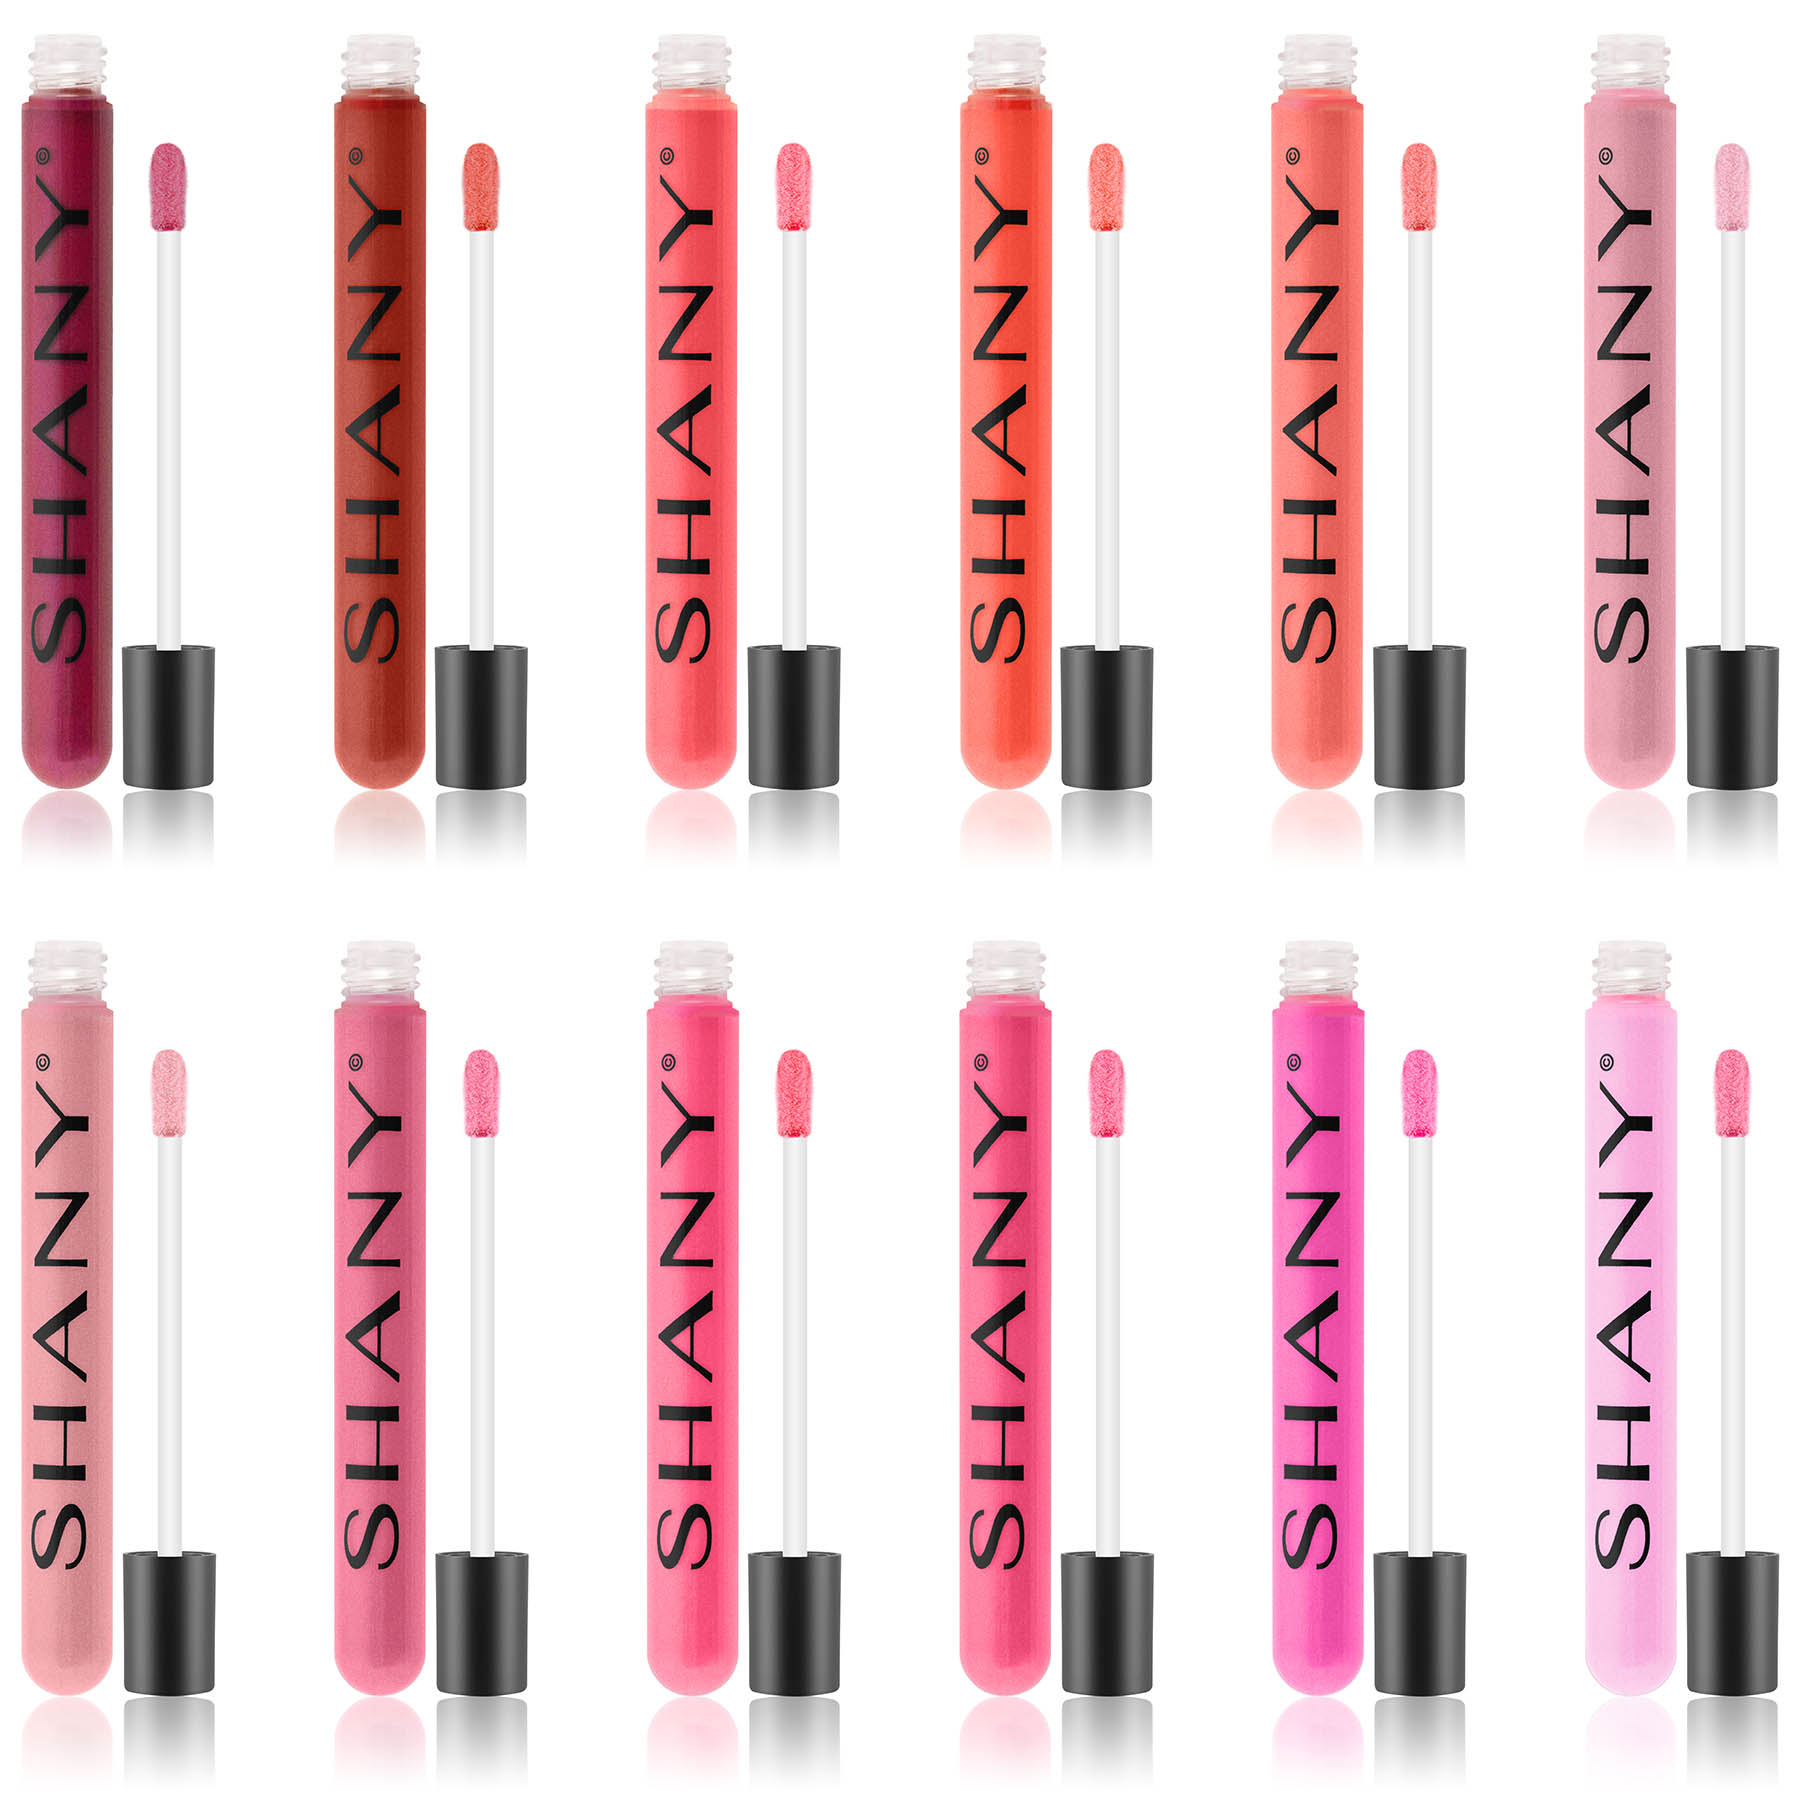 SHANY The Wanted Ones - 12 Piece Lip Gloss Set with Aloe Vera and Vitamin E - image 5 of 5